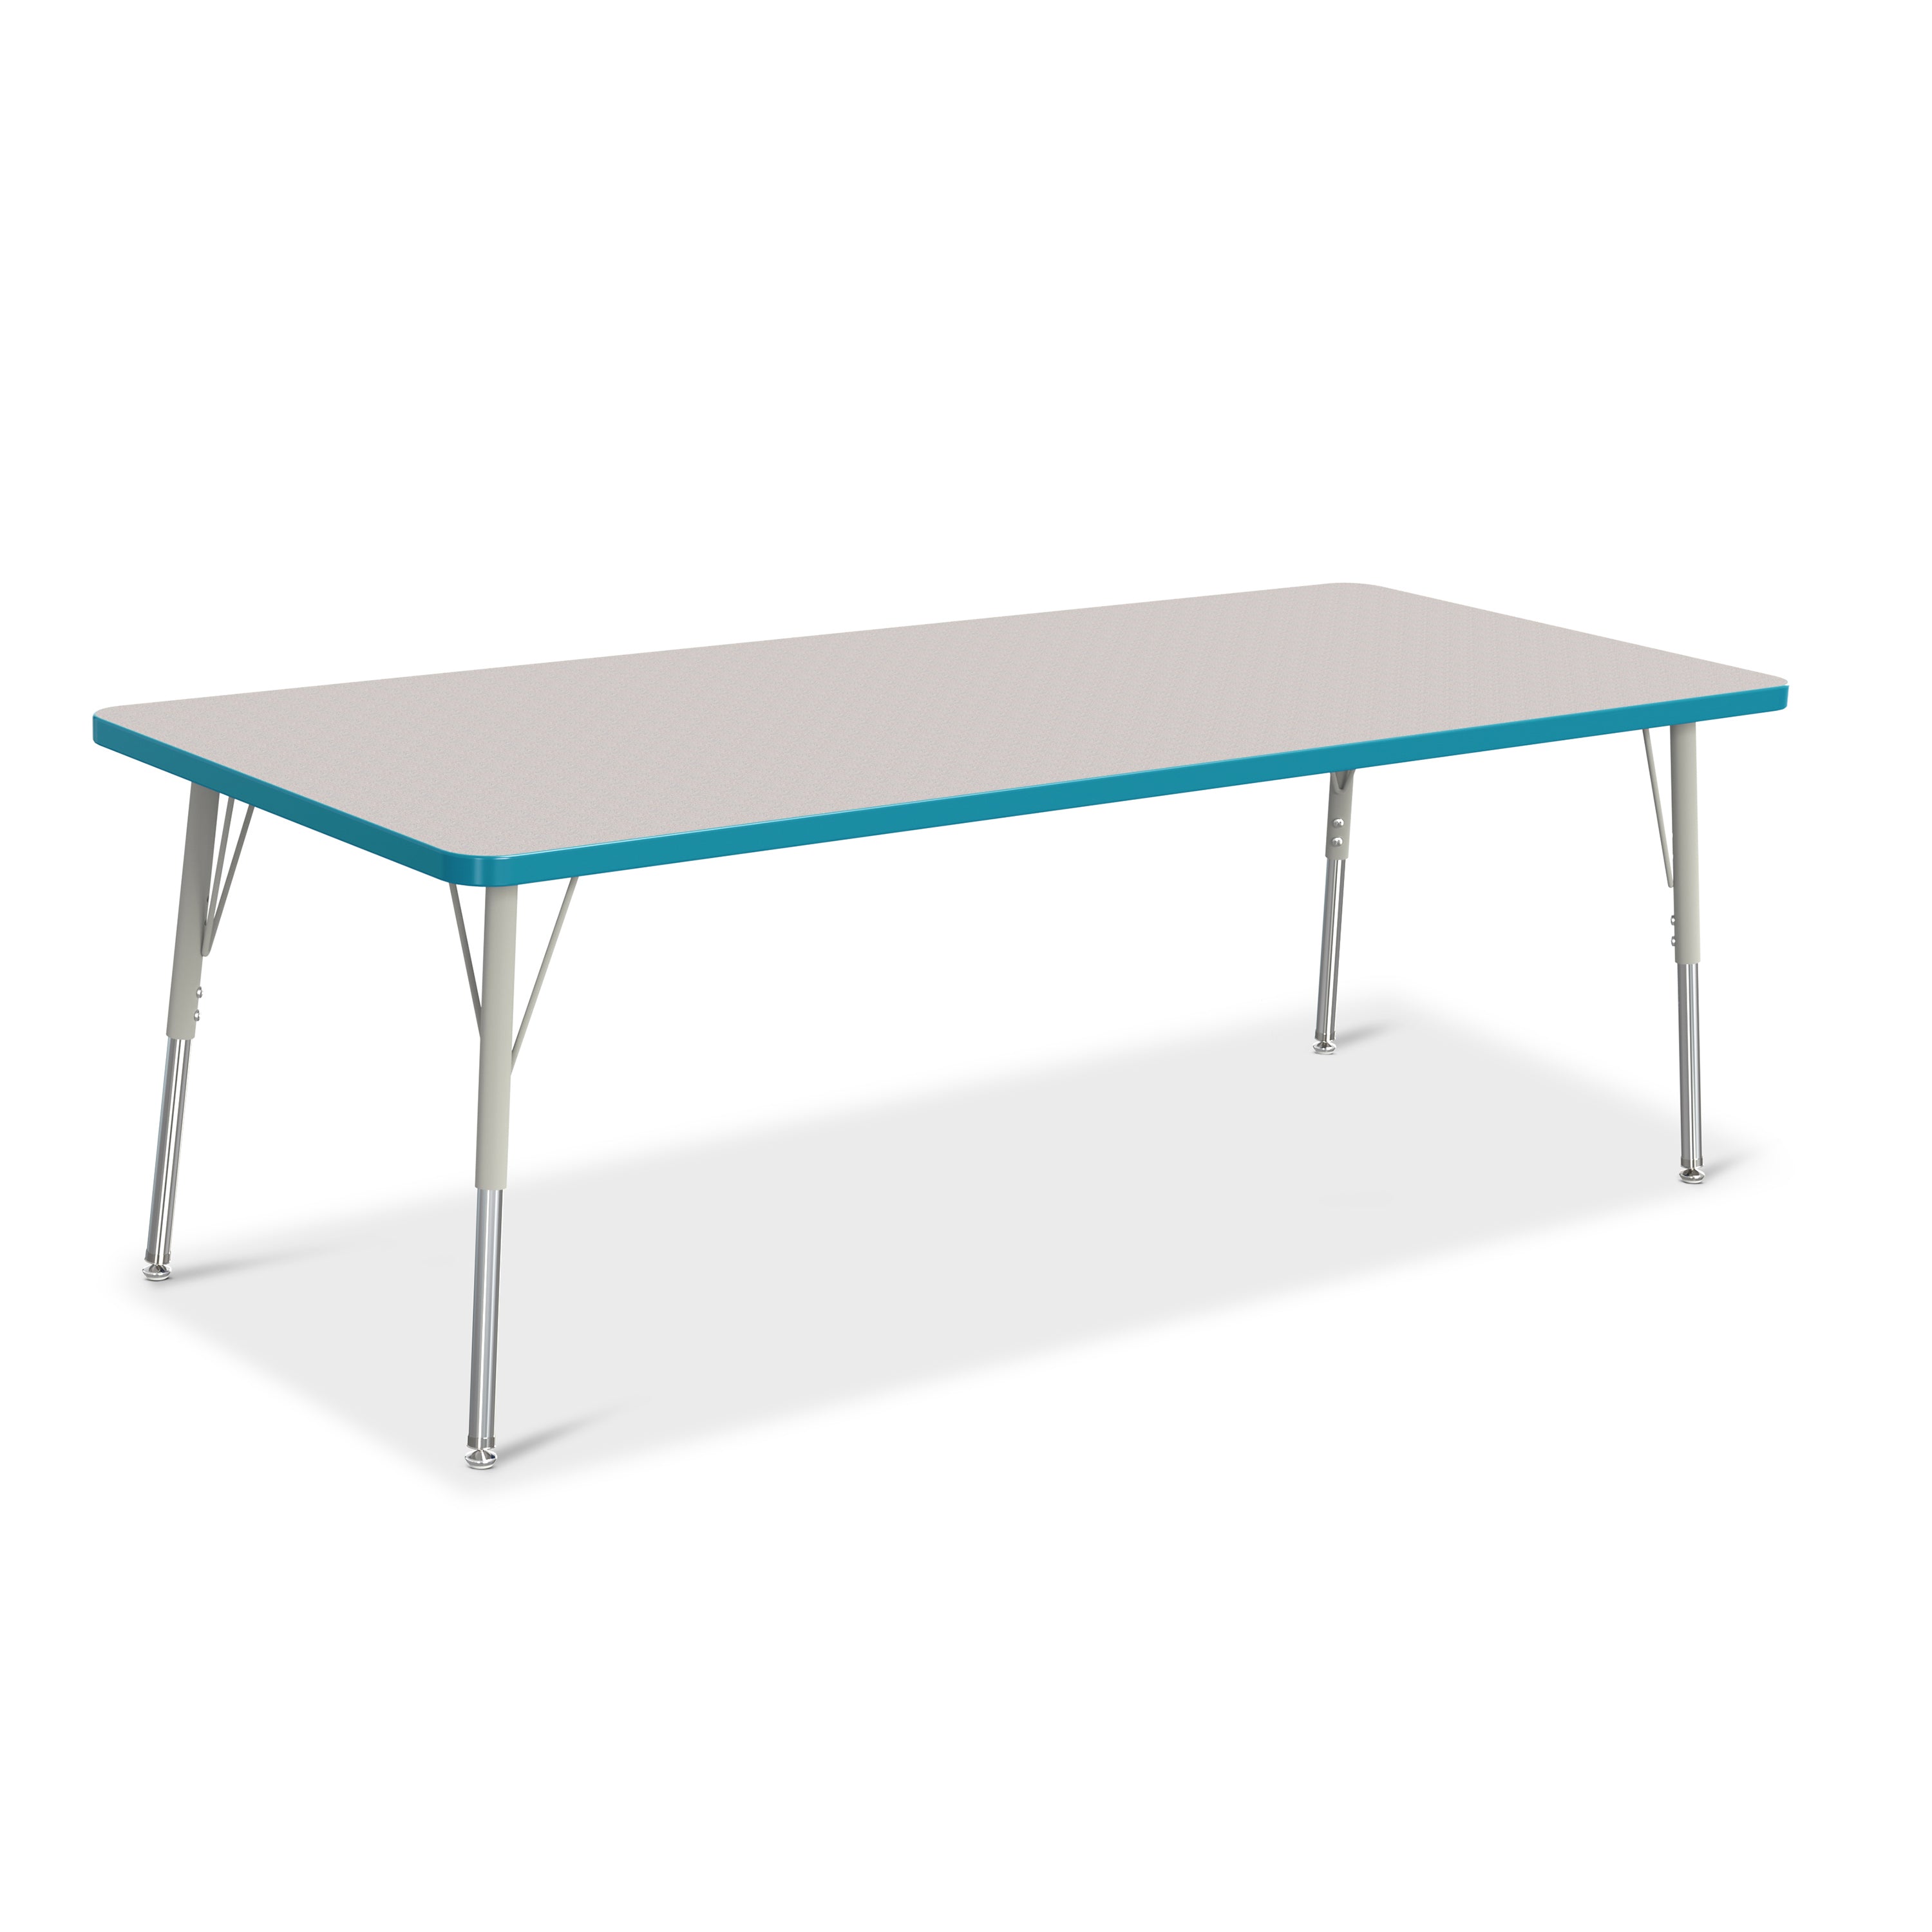 6413JCA005, Berries Rectangle Activity Table - 30" X 72", A-height - Freckled Gray/Teal/Gray